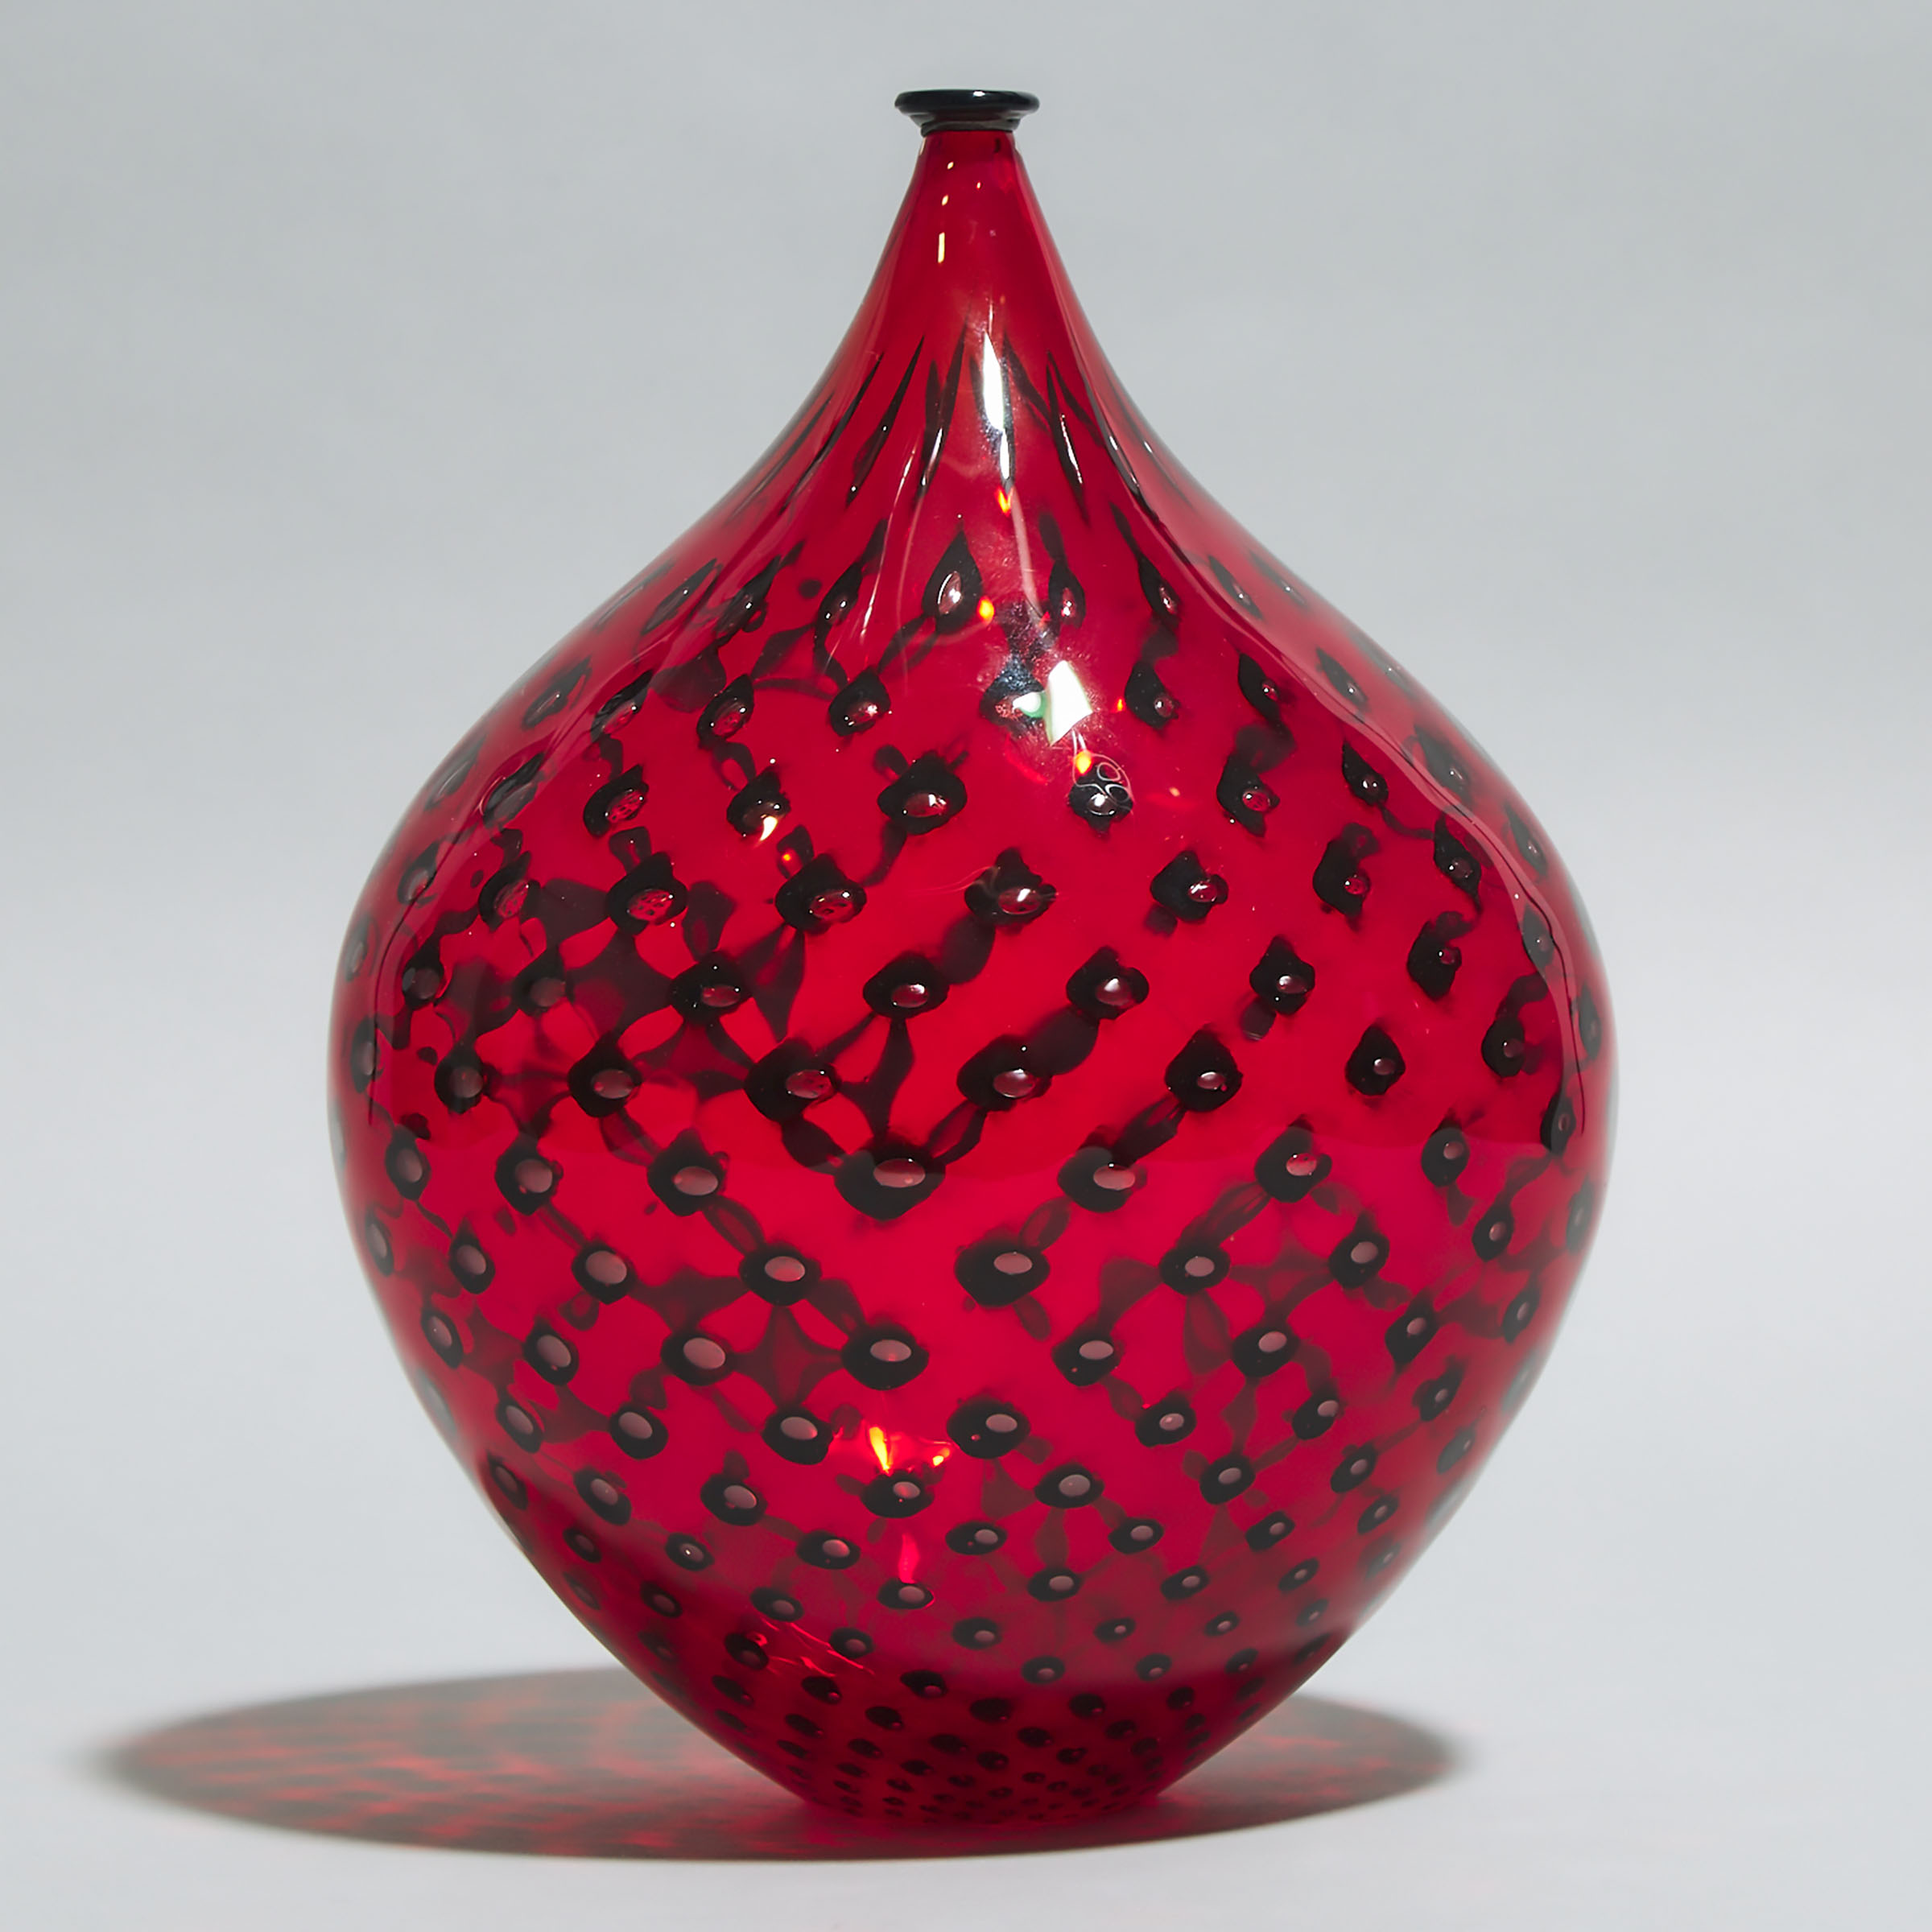 Ian Forbes (Canadian), Internally Decorated Red Glass Vase, 1992